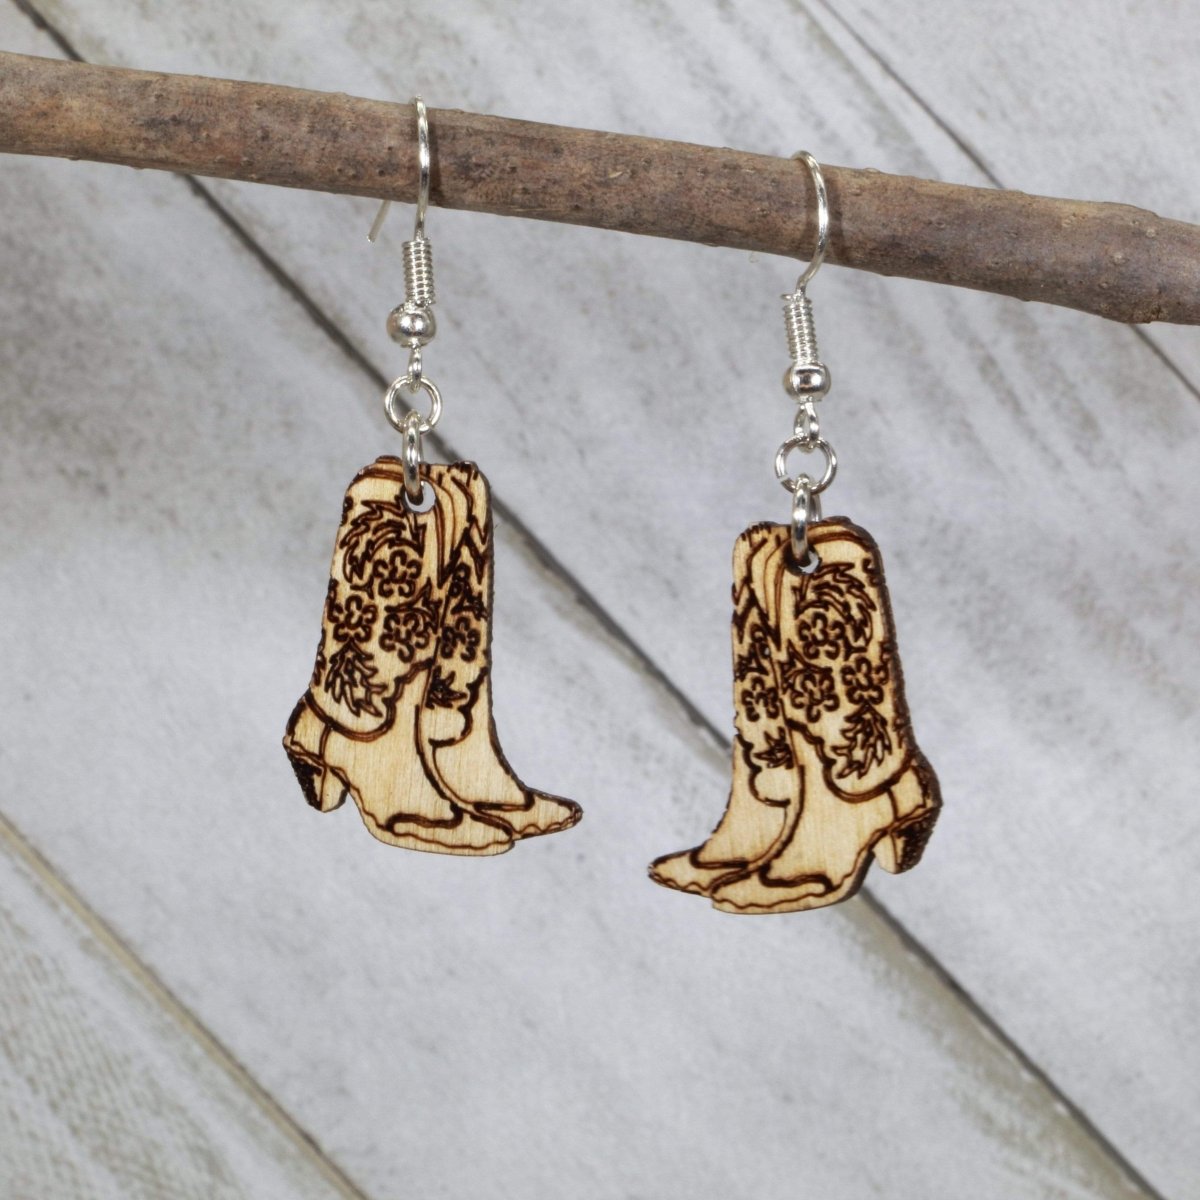 Western Cowboy Boots Dangle Earrings - Natural Wood - Cate's Concepts, LLC